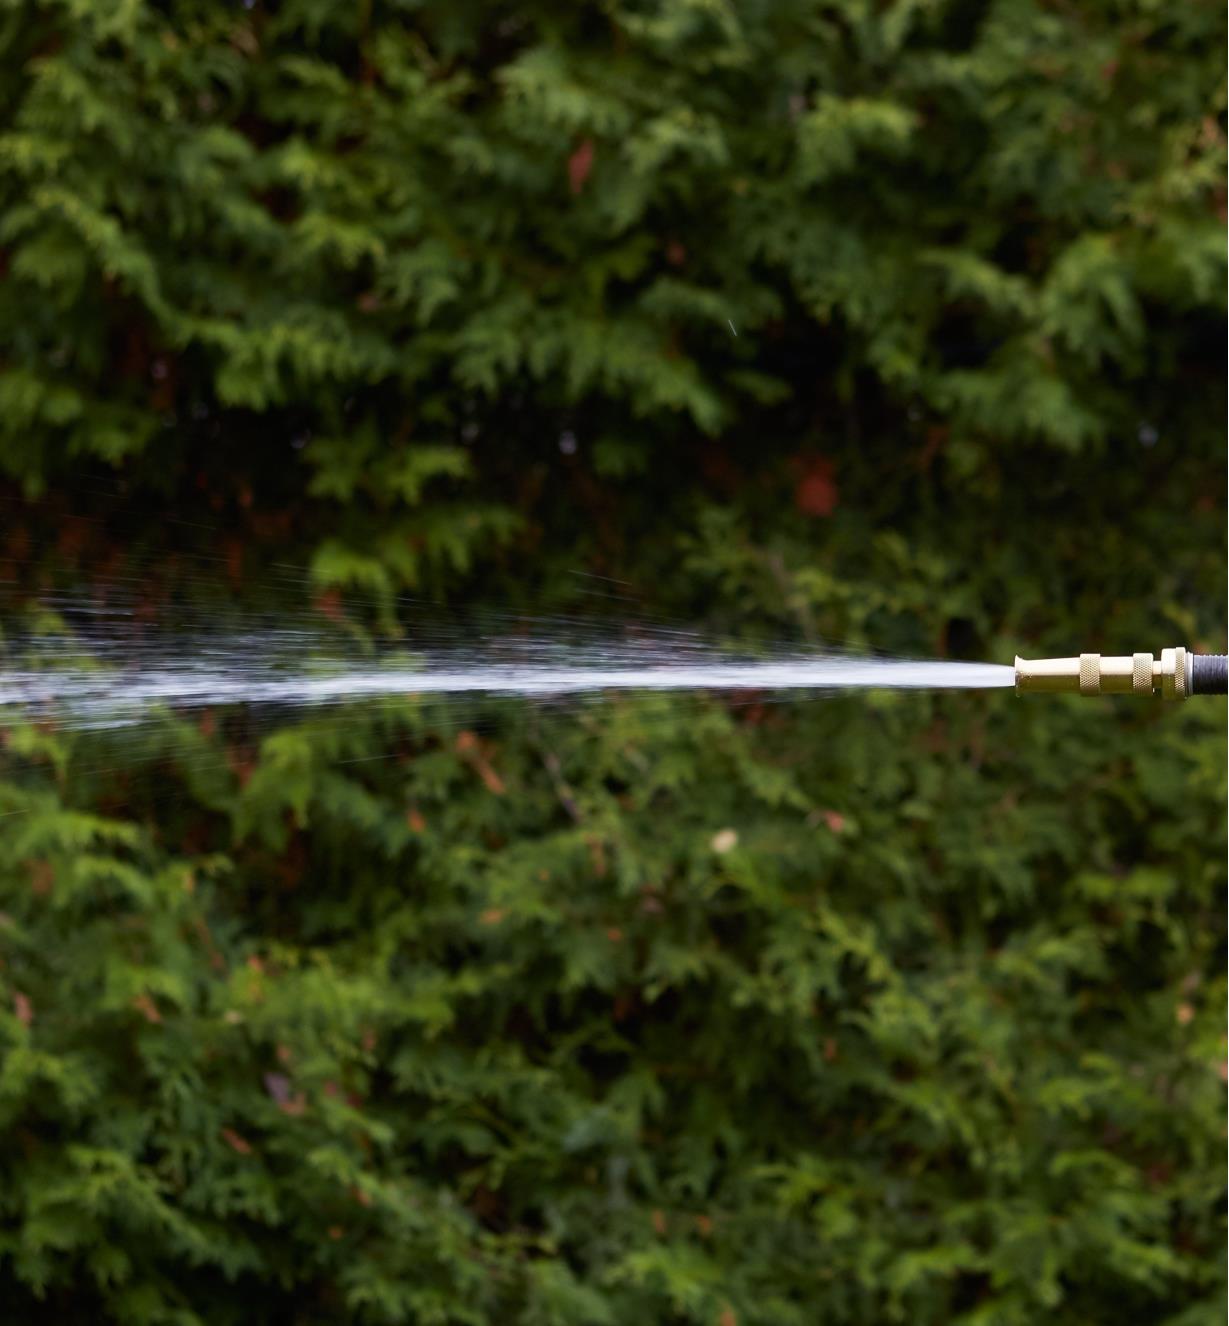 Brass Hose Nozzle spraying a sharp stream of water